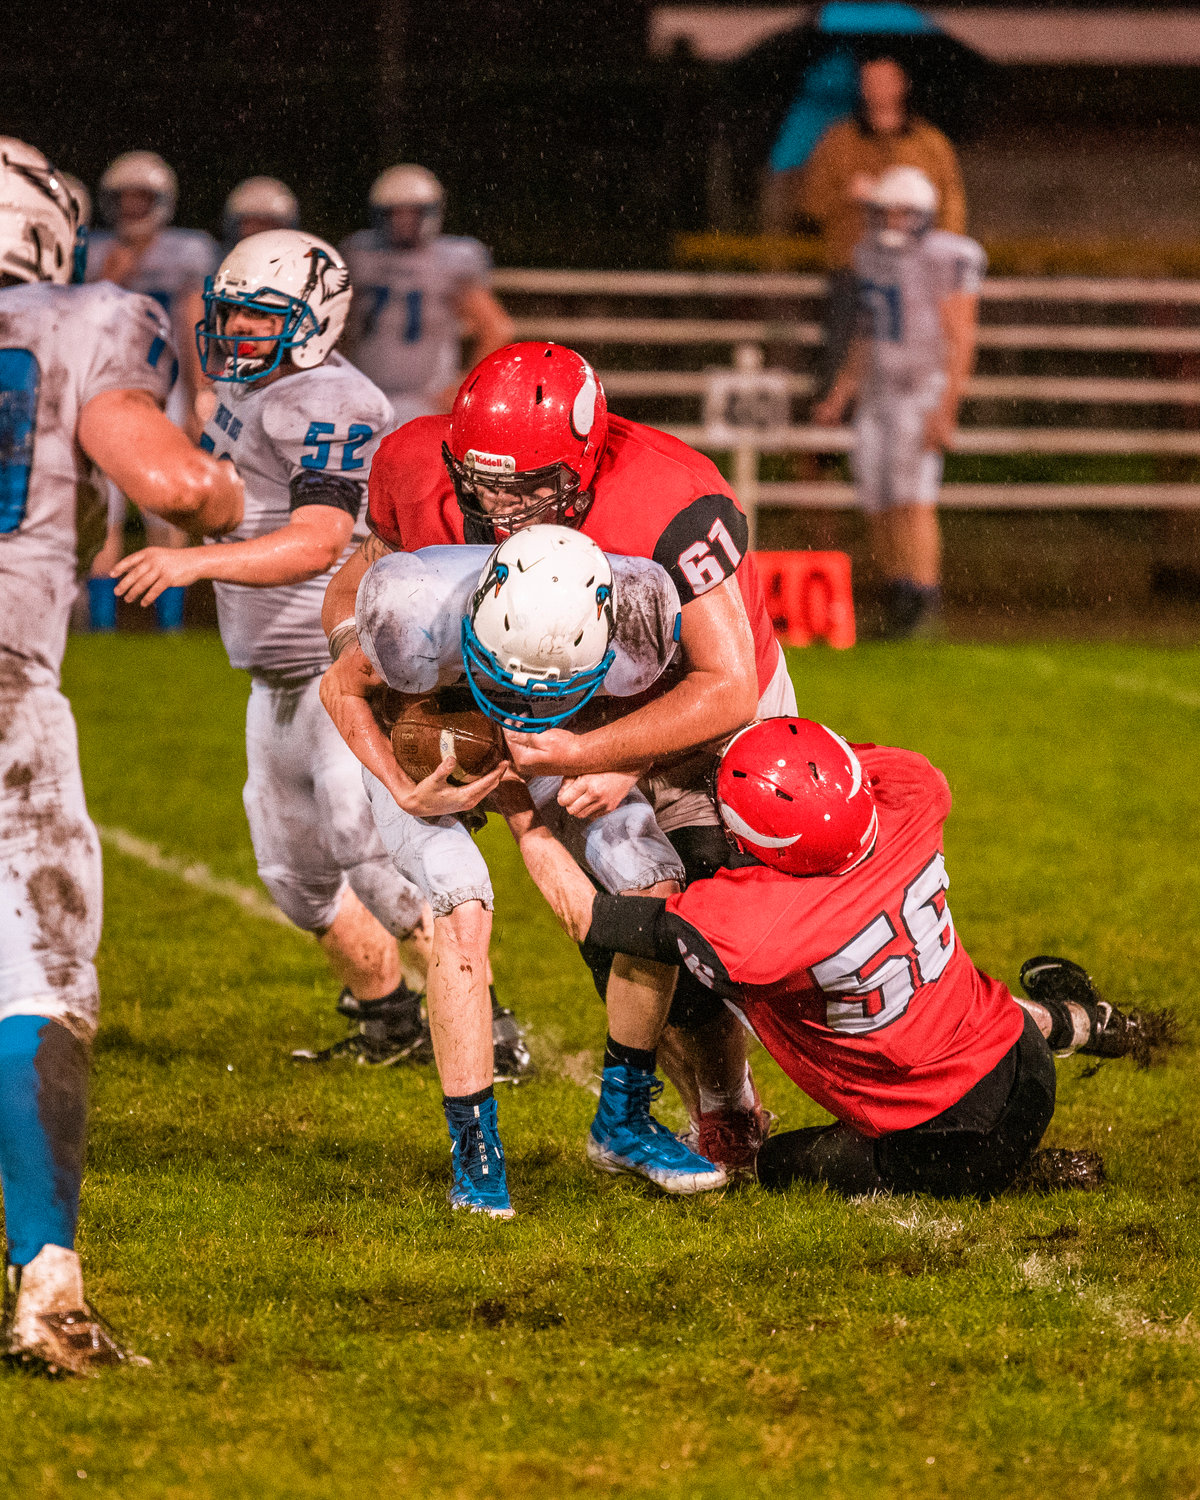 Vikings defenders Ryan Haenke (61) and Brenden Cornelius (56) make a tackle for a sack Thursday night during a game against Toutle Lake.